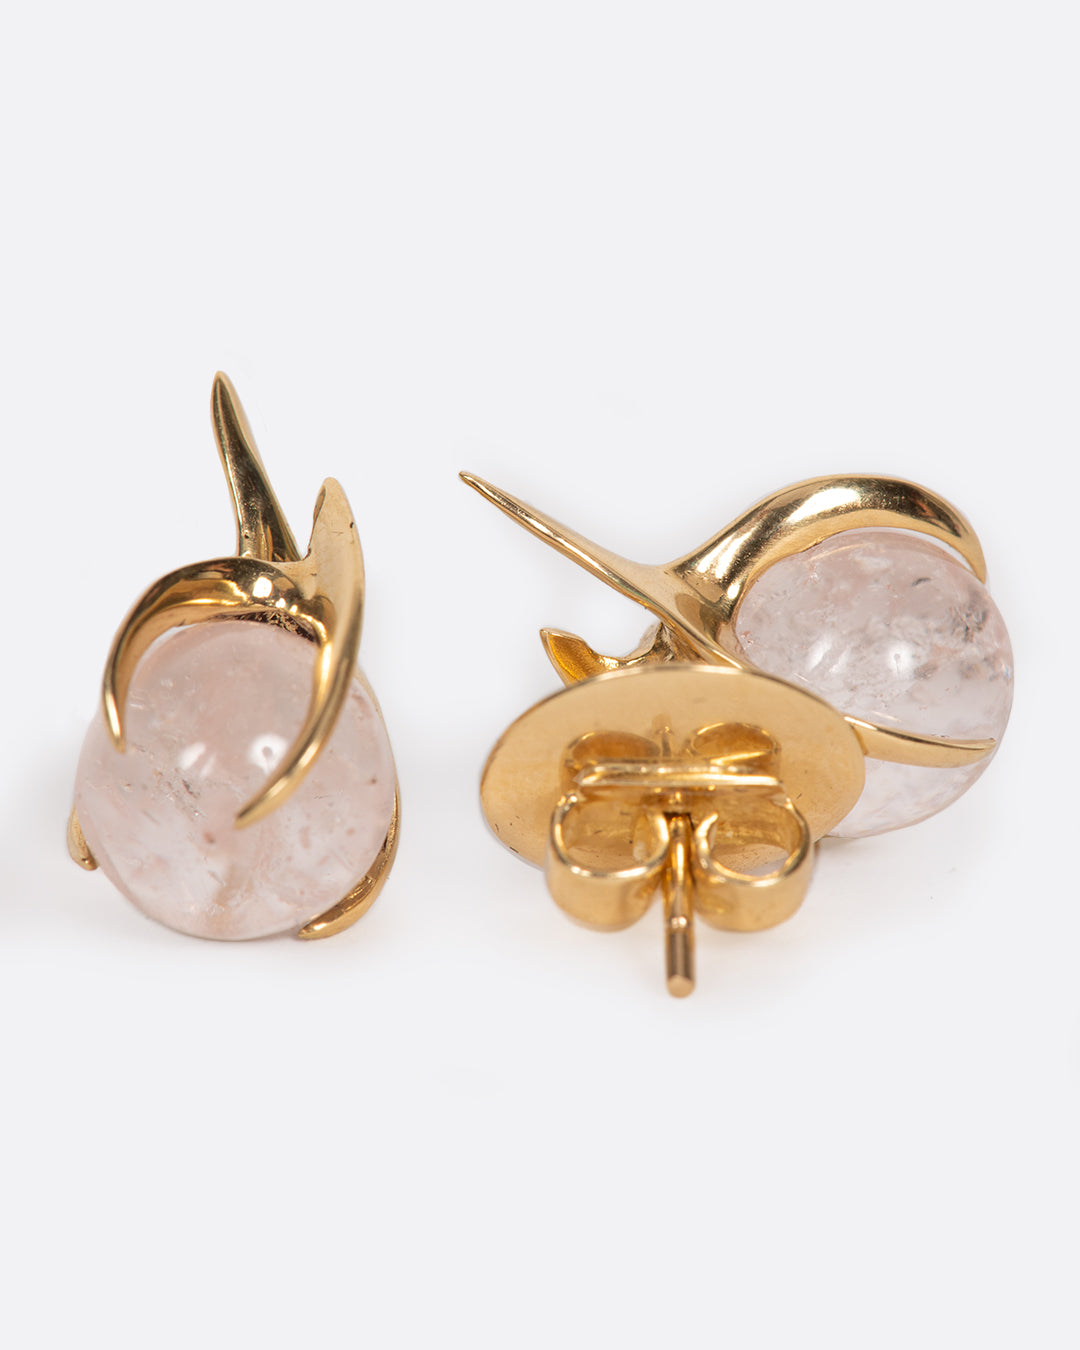 A pair of hand carved prong earrings holding morganite spheres, shown from the back.